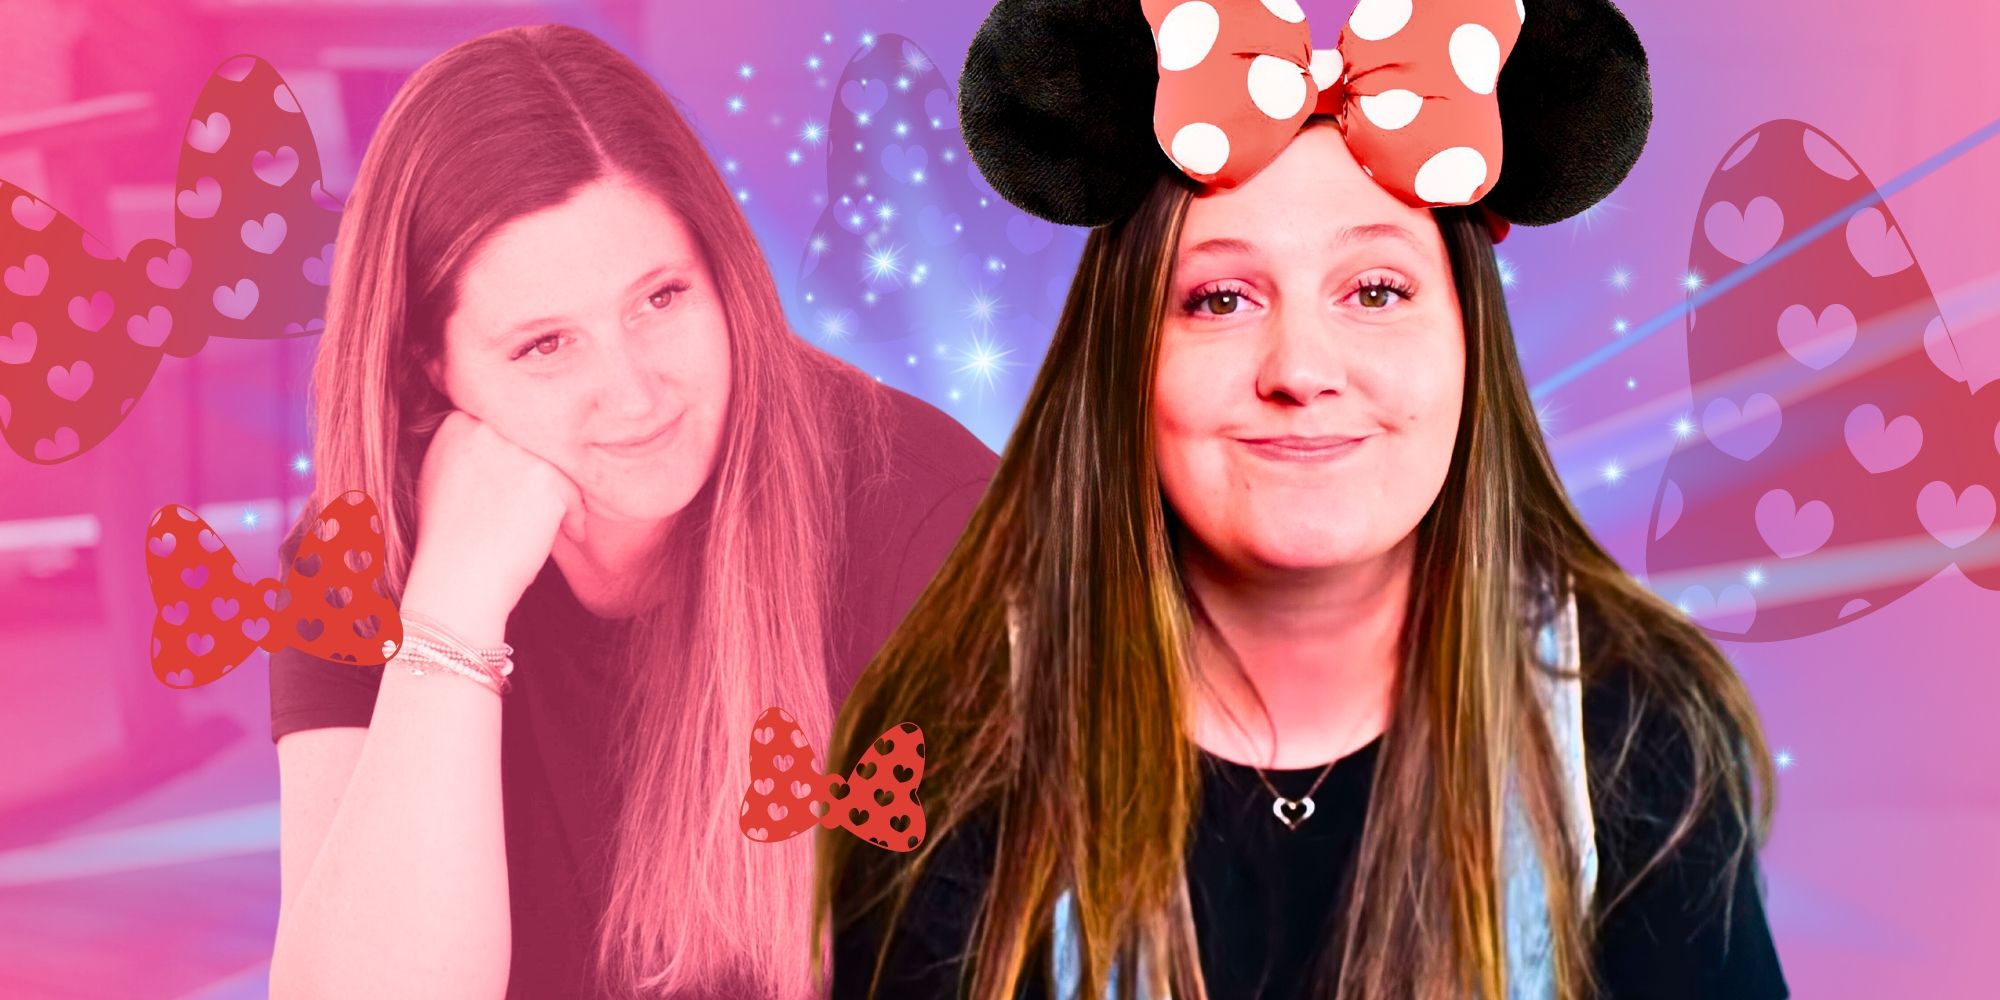 tori roloff minnie mouse ears montage pink background 1000 lb sisters